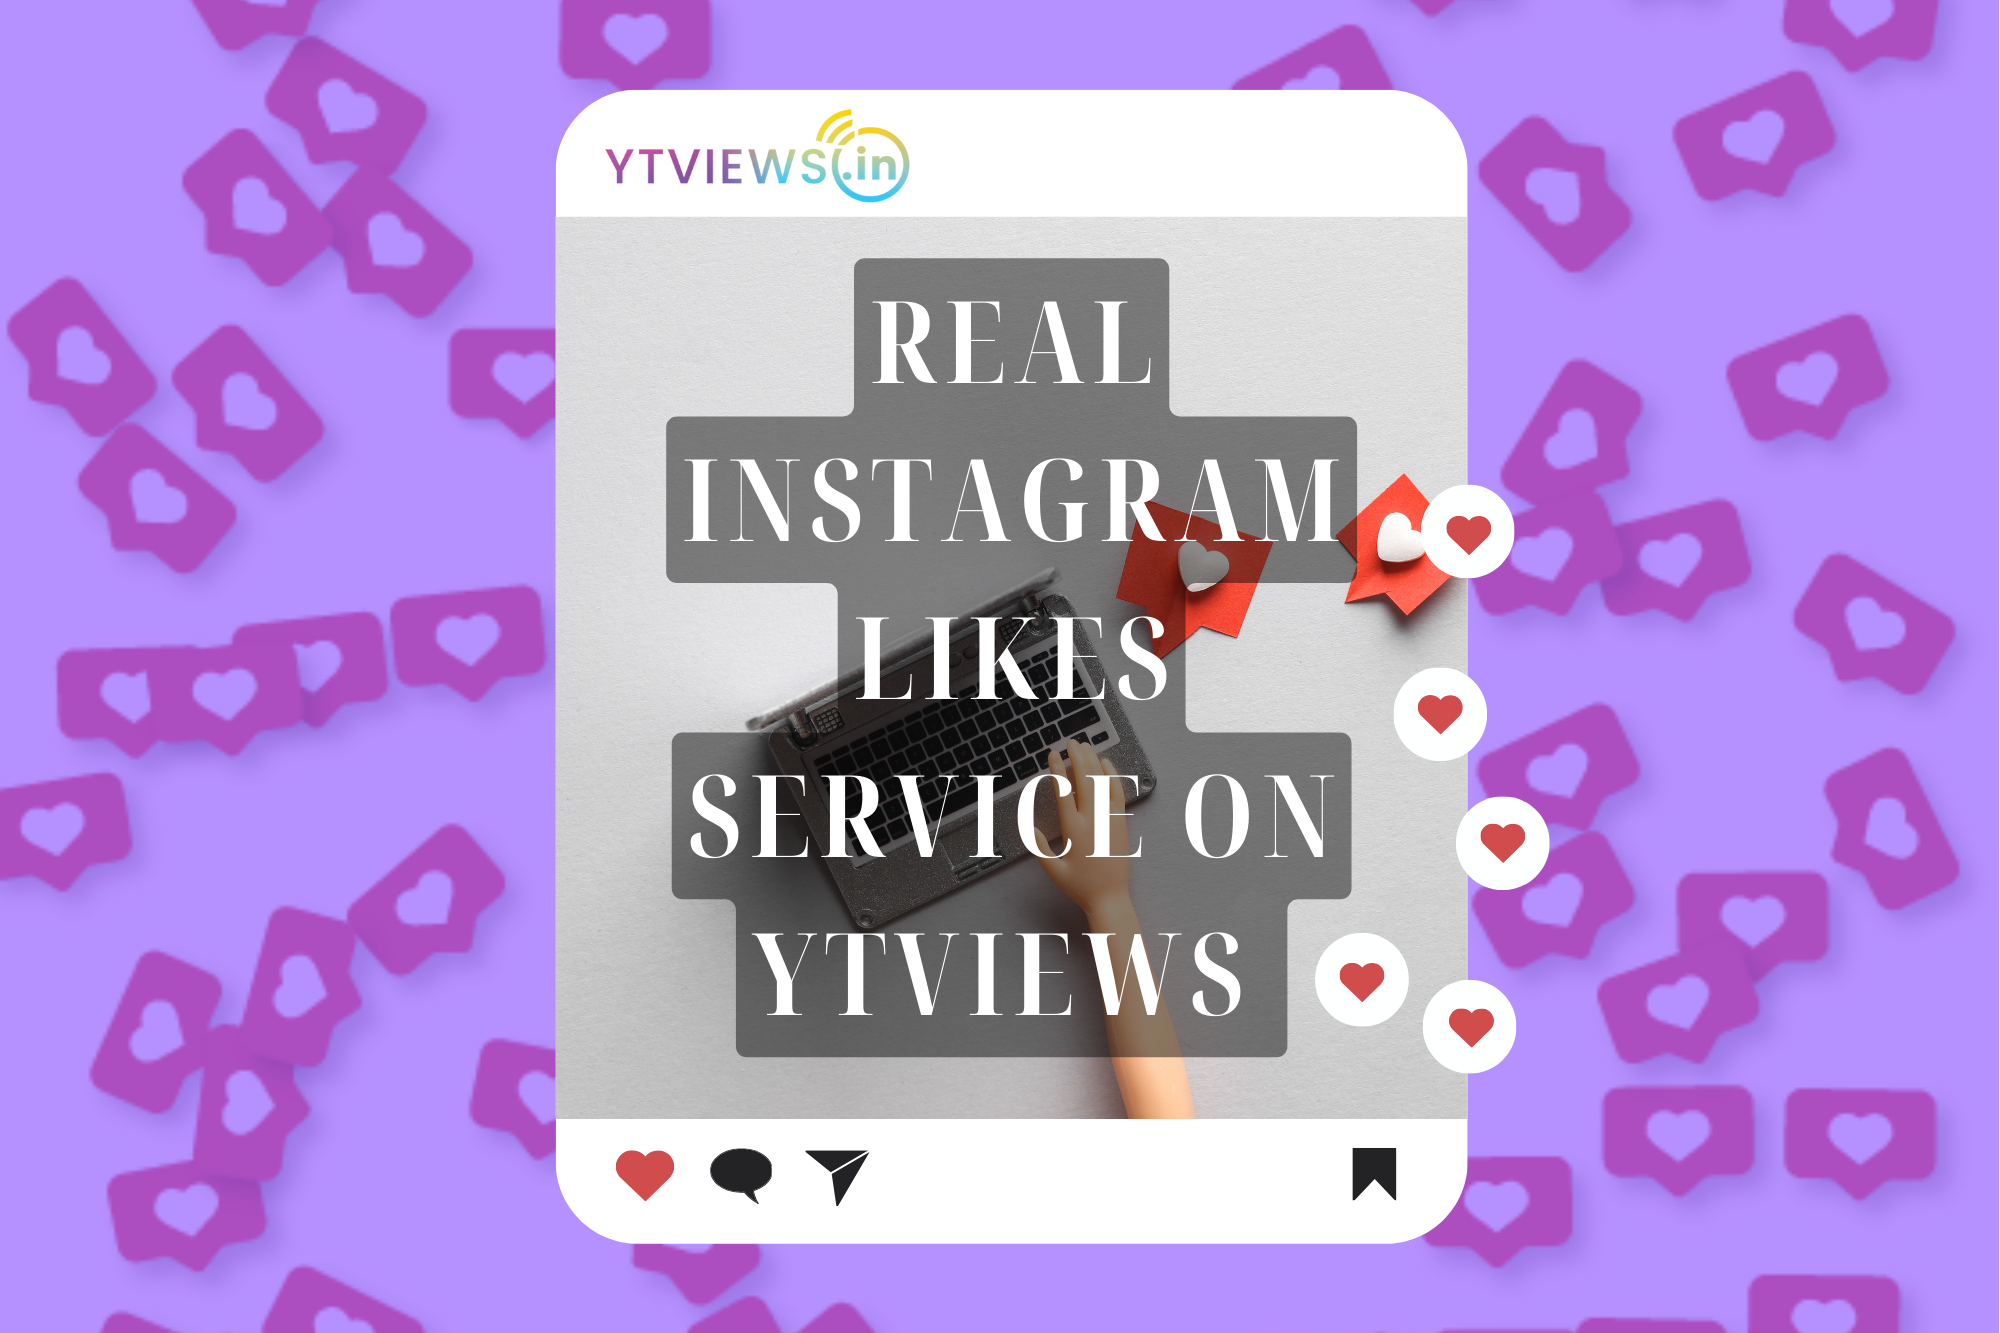 How does buying Instagram Likes from Ytviews boost your Growth?